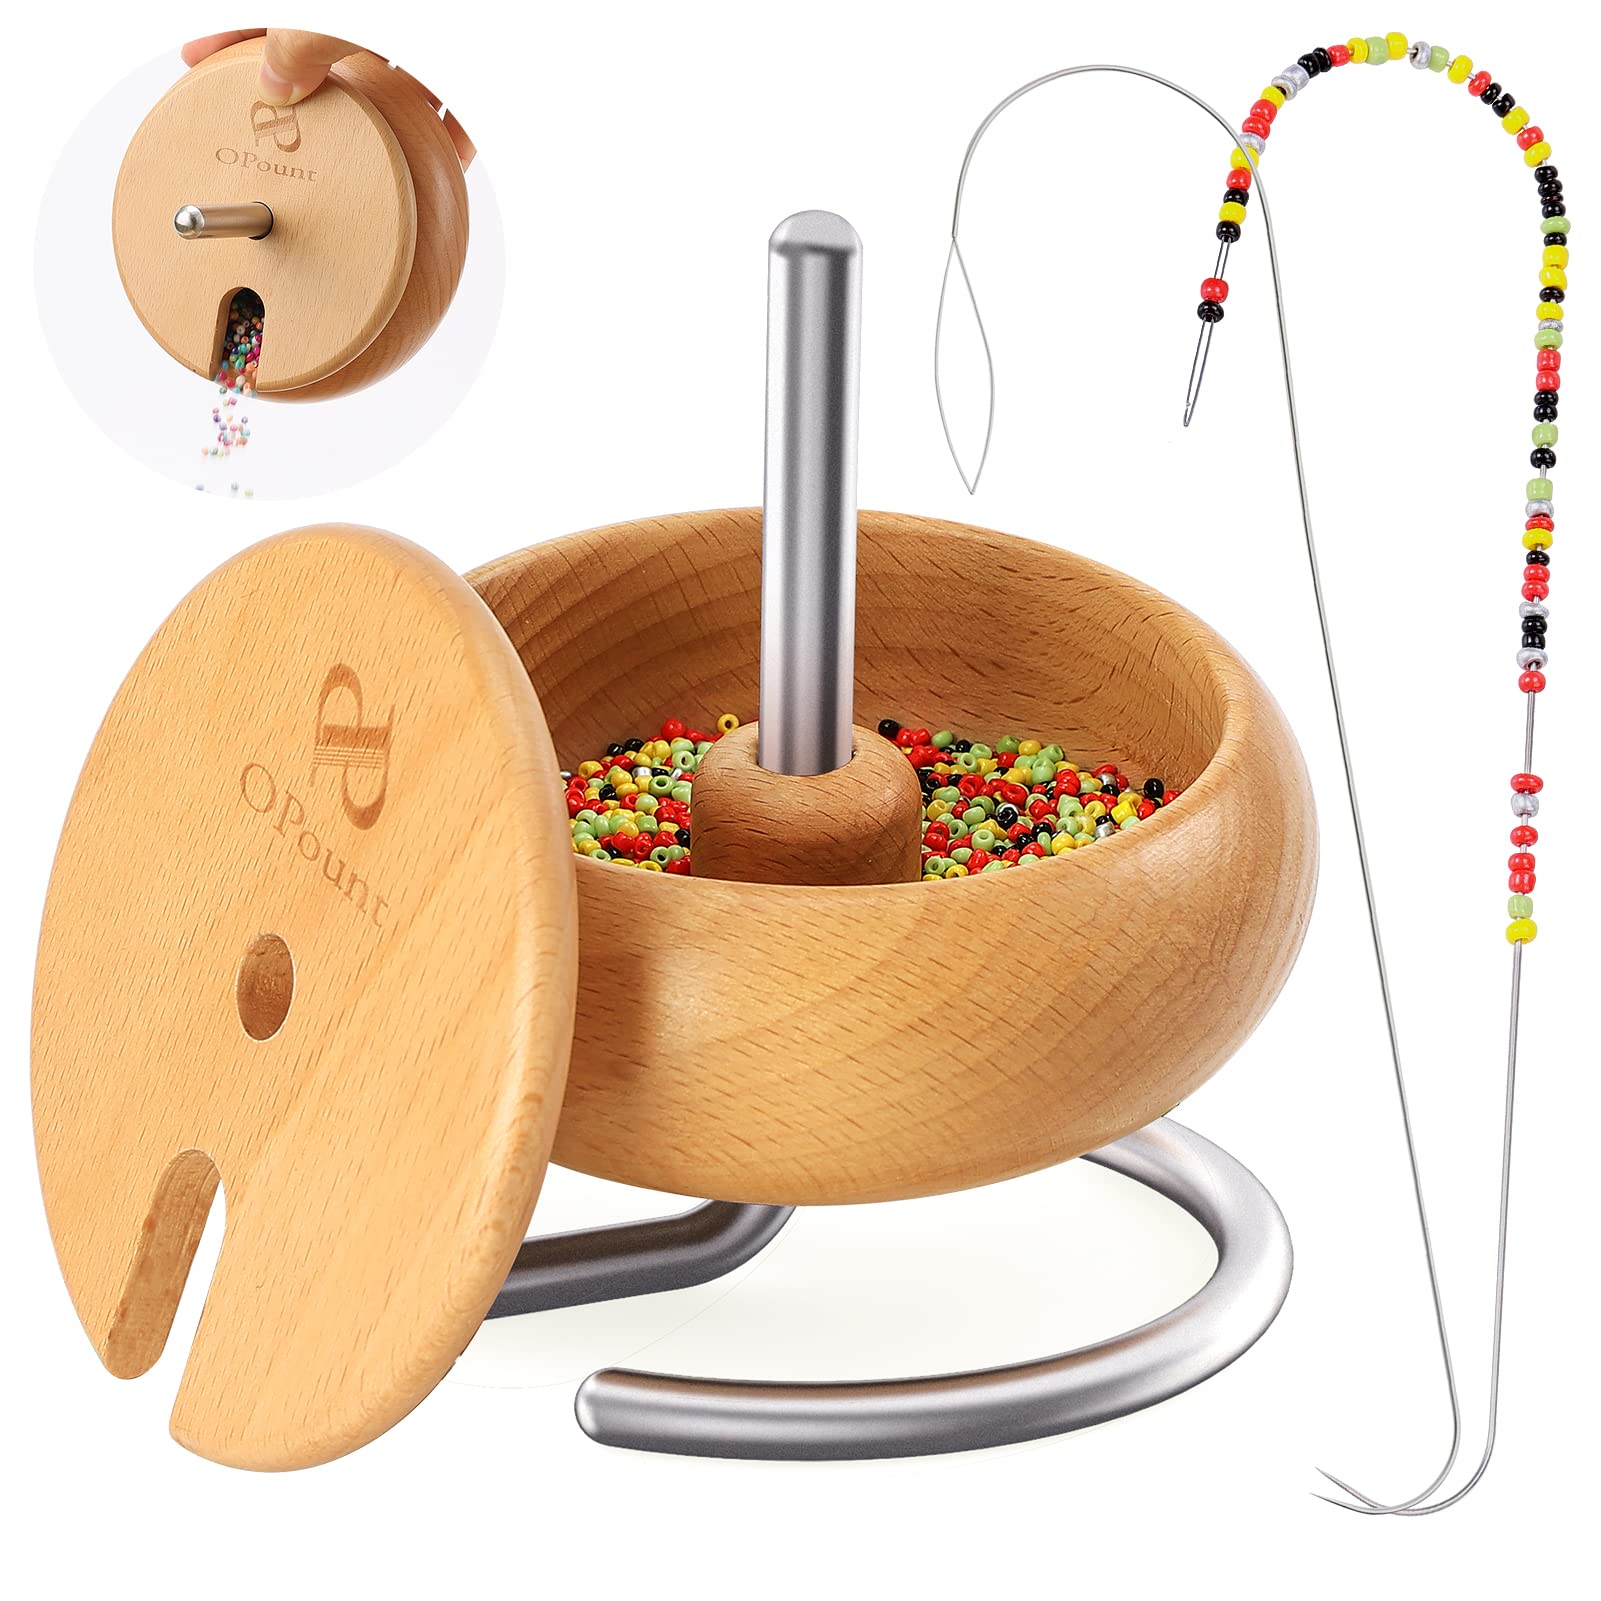 Electric Bead Spinner Battery Operated Beading Bowl Spinner Spin Loader Bead♚